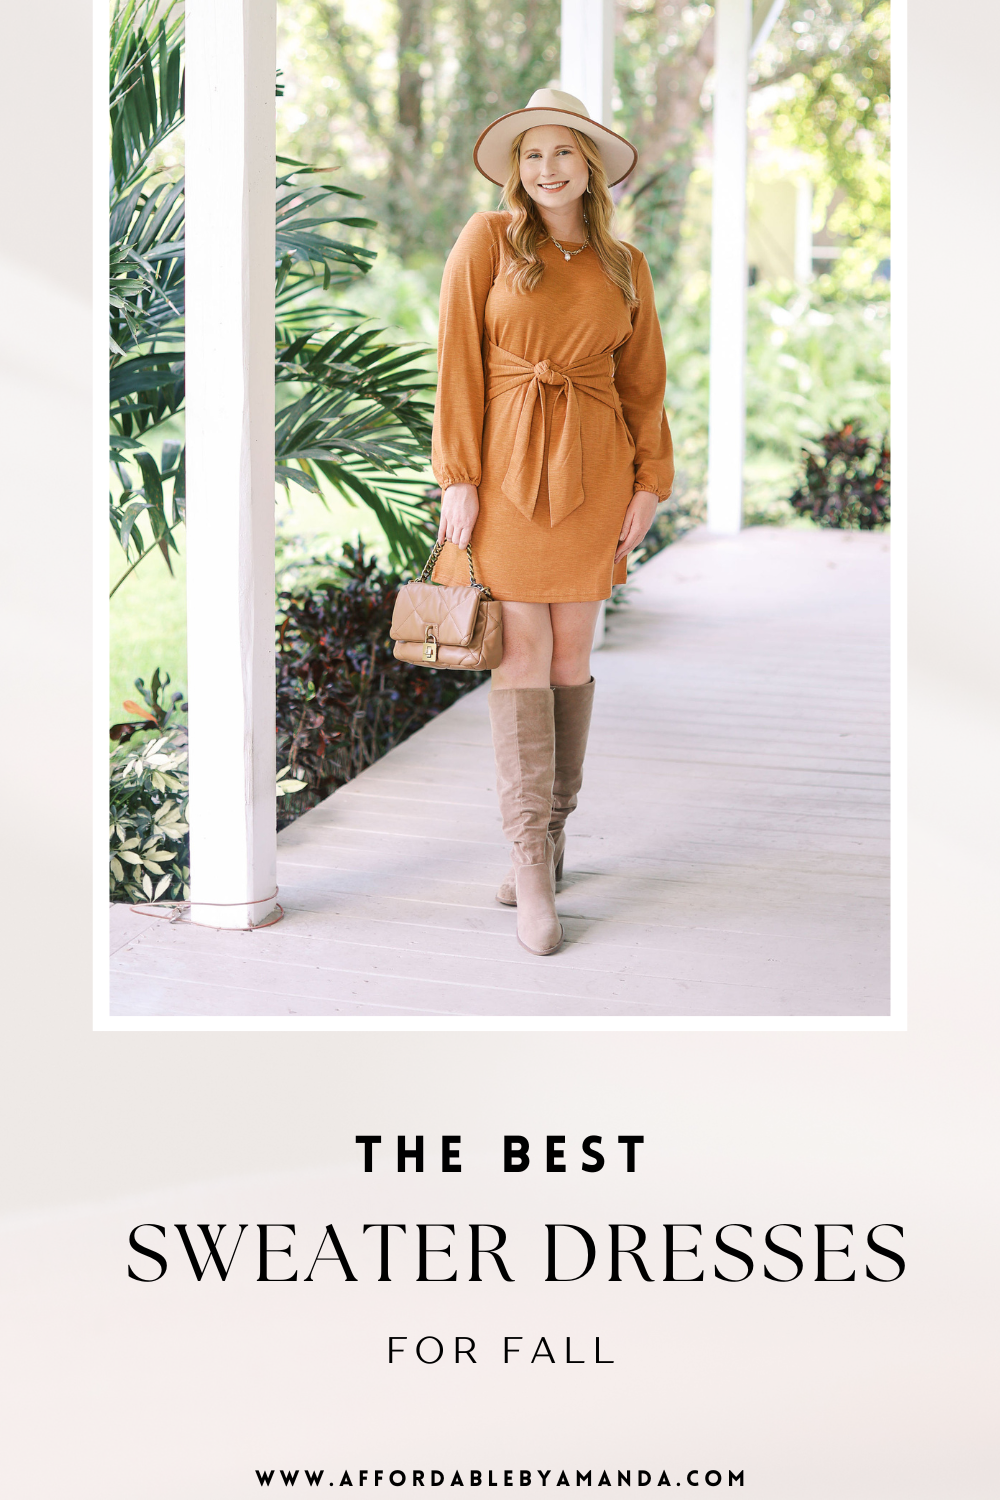 Best Sweater Dresses for Fall